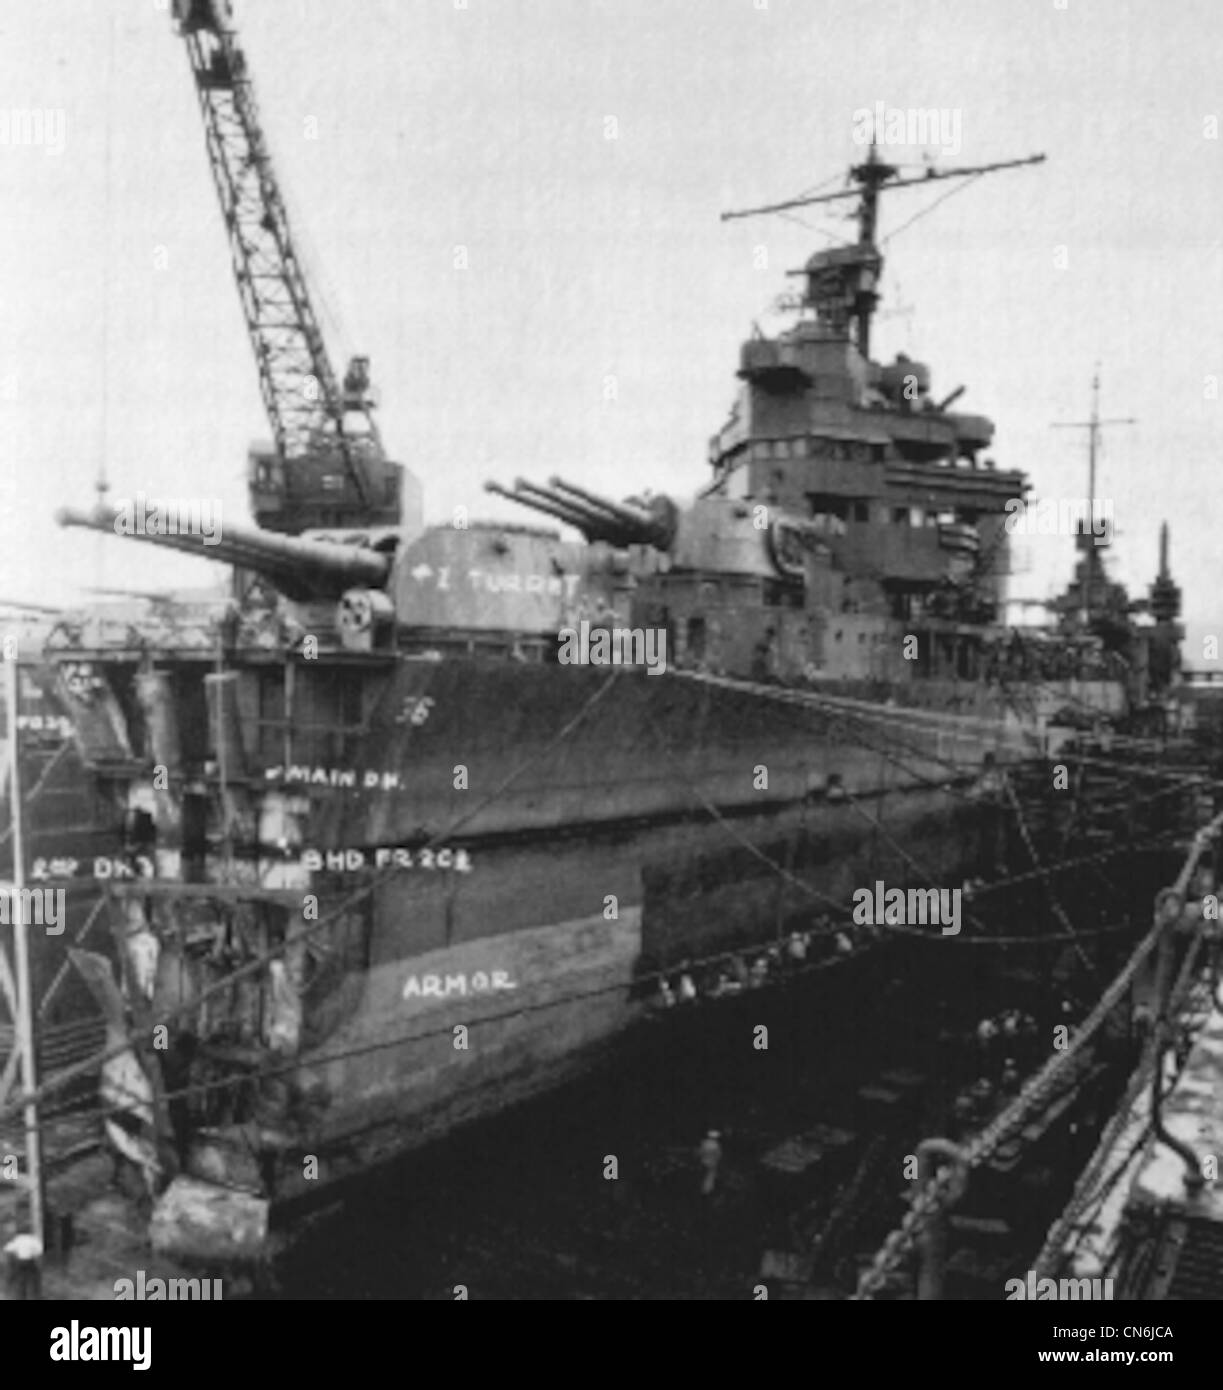 Minneapolis at Pearl Harbor in March, 1943 being repaired after torpedo damage at the Battle of Tassafaronga on November 30, 1942. Minneapolis was flagship of TF-67 and was hit by two torpedoes; one blew her bow off, ahead of #1 turret and the other struck further aft amidships. Stock Photo